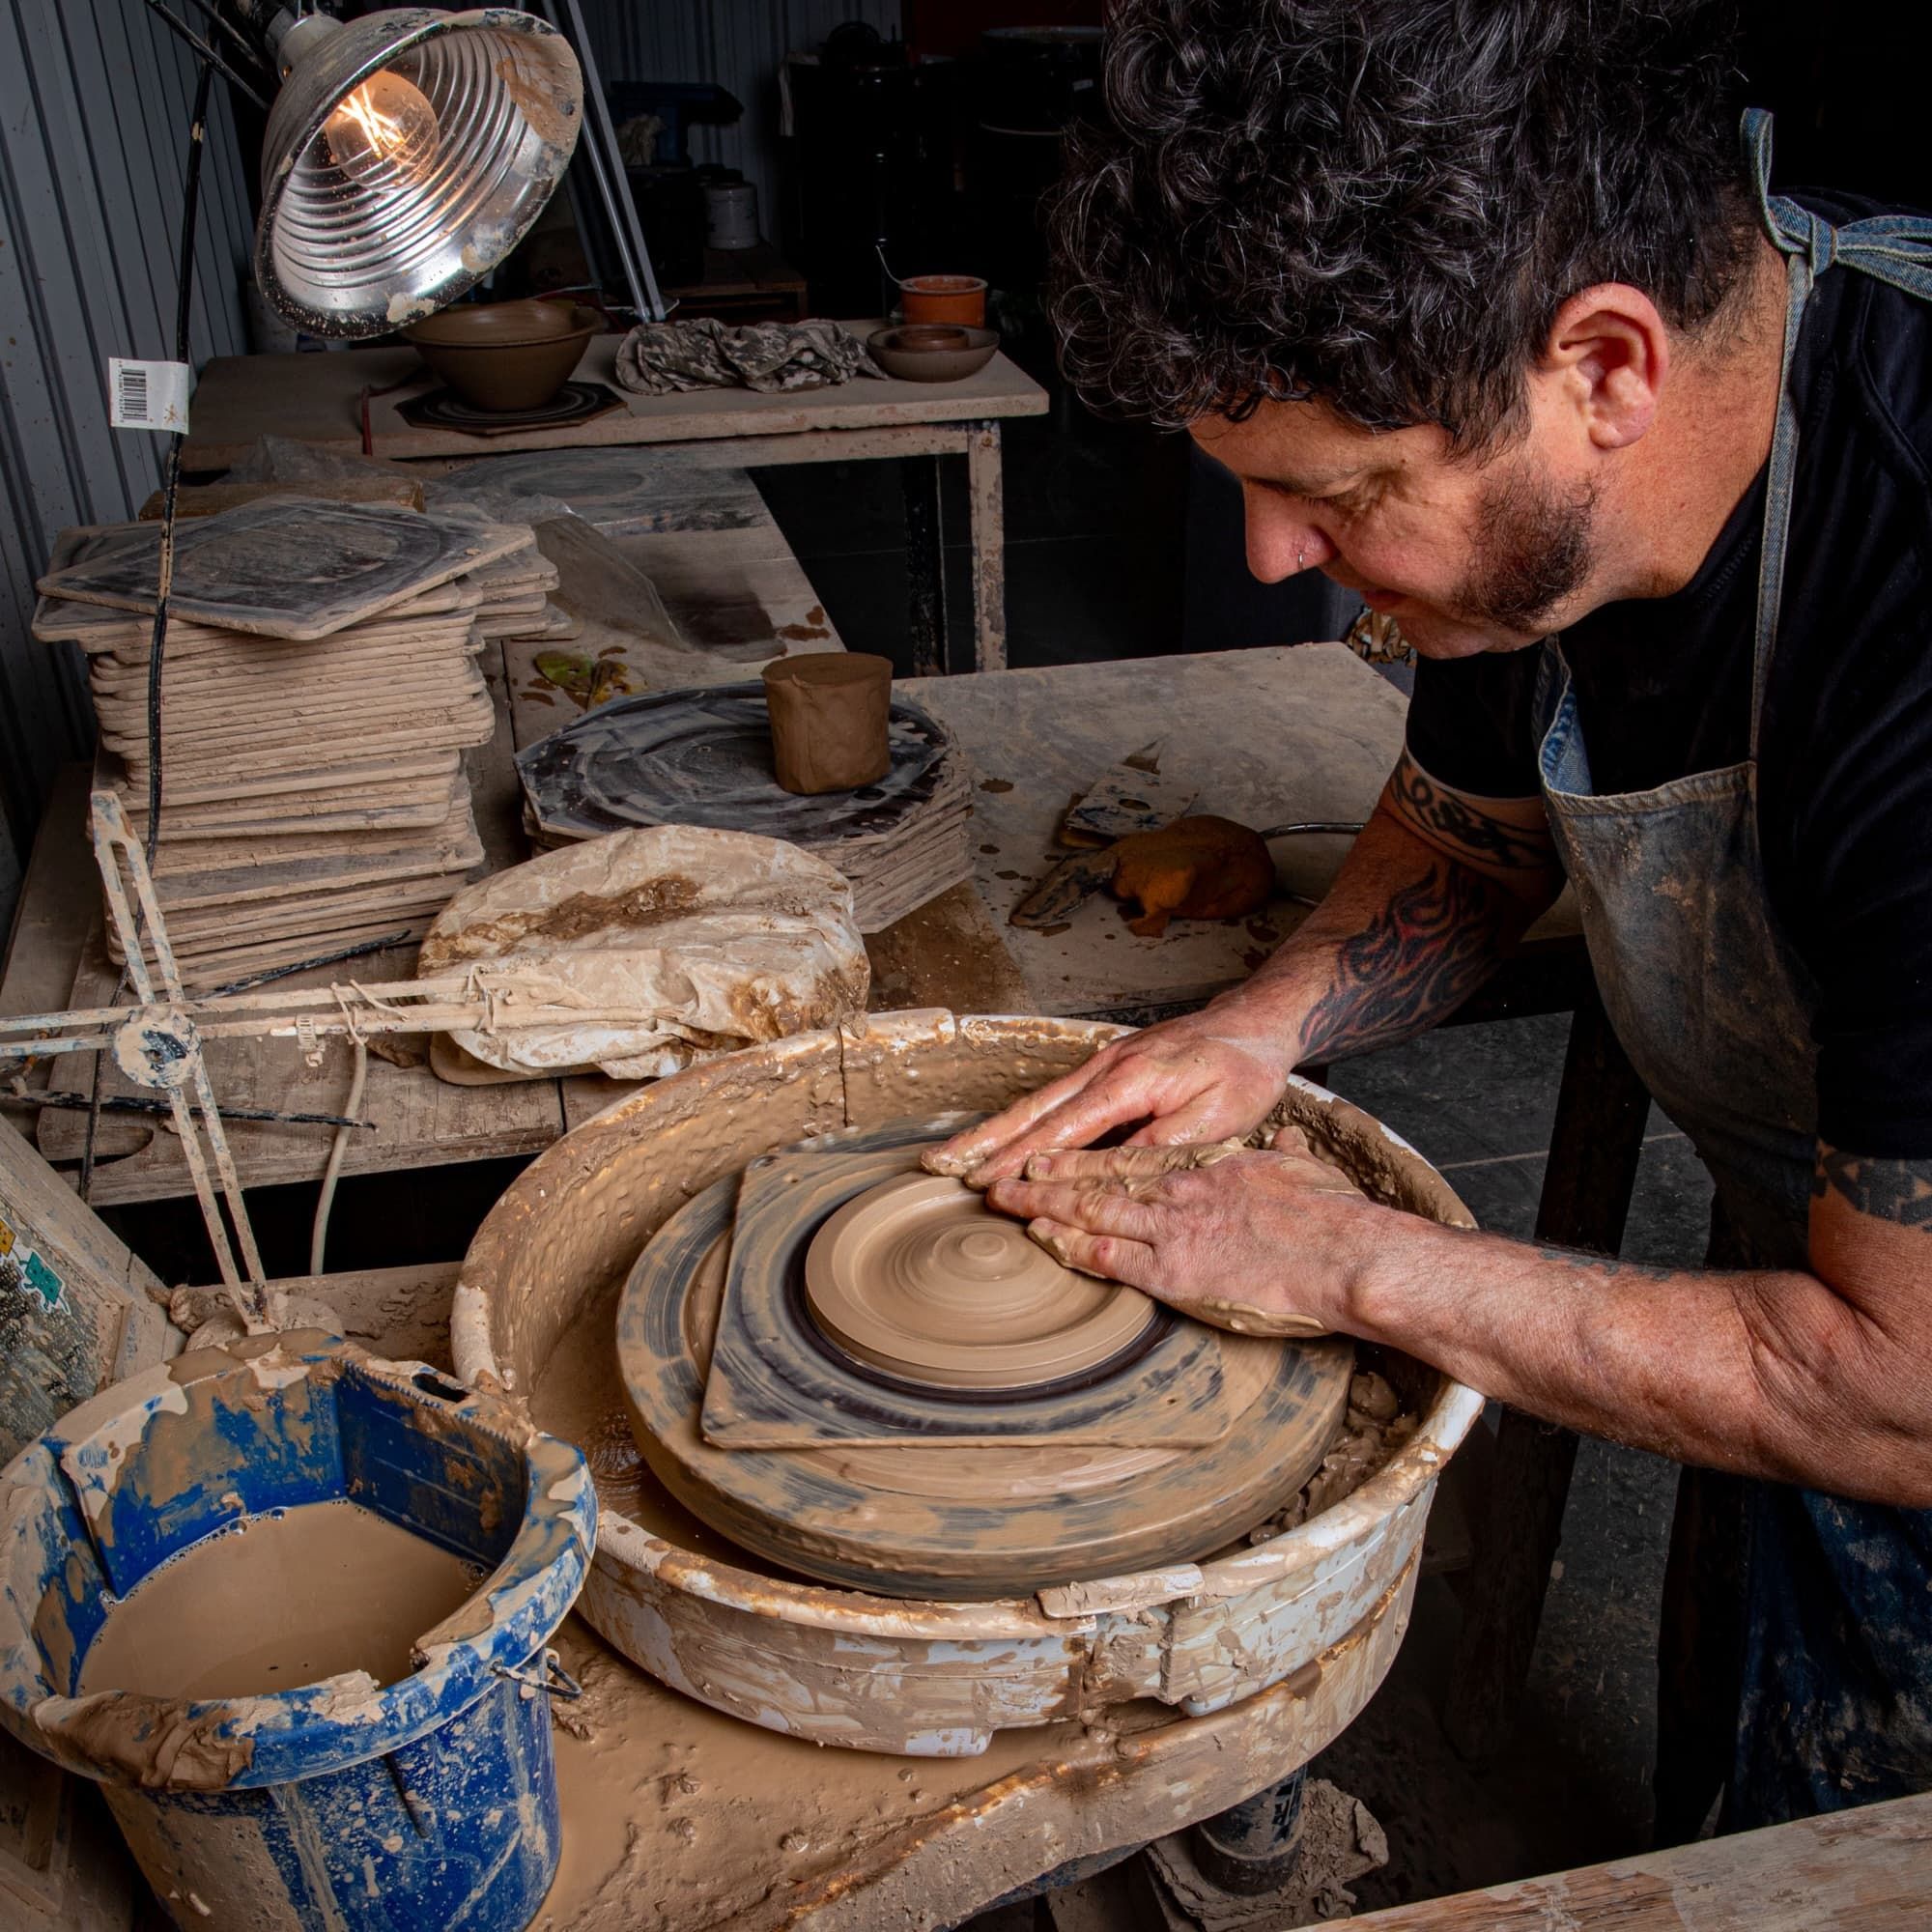 In a pottery workshop, a person sits at a potter's wheel shaping a plate-shaped incense holder 